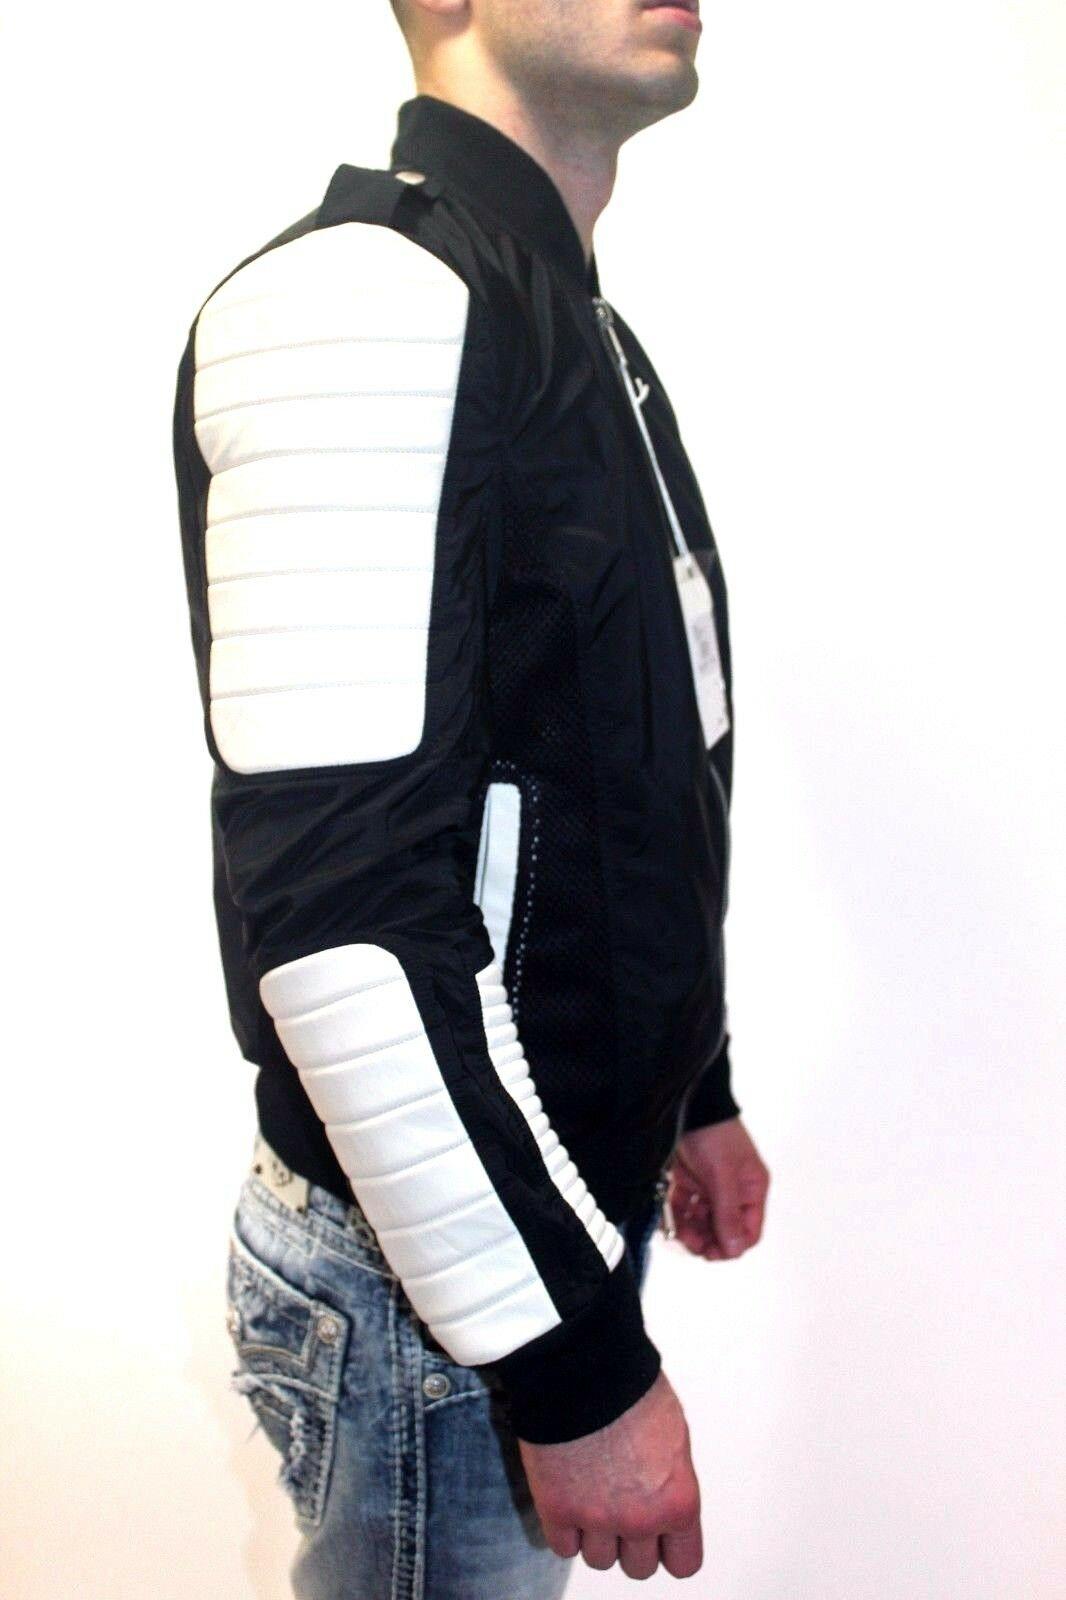 Yes London Mens Jacket Leather Quilted Details Moto Bomber Made In Italy - SVNYFancy